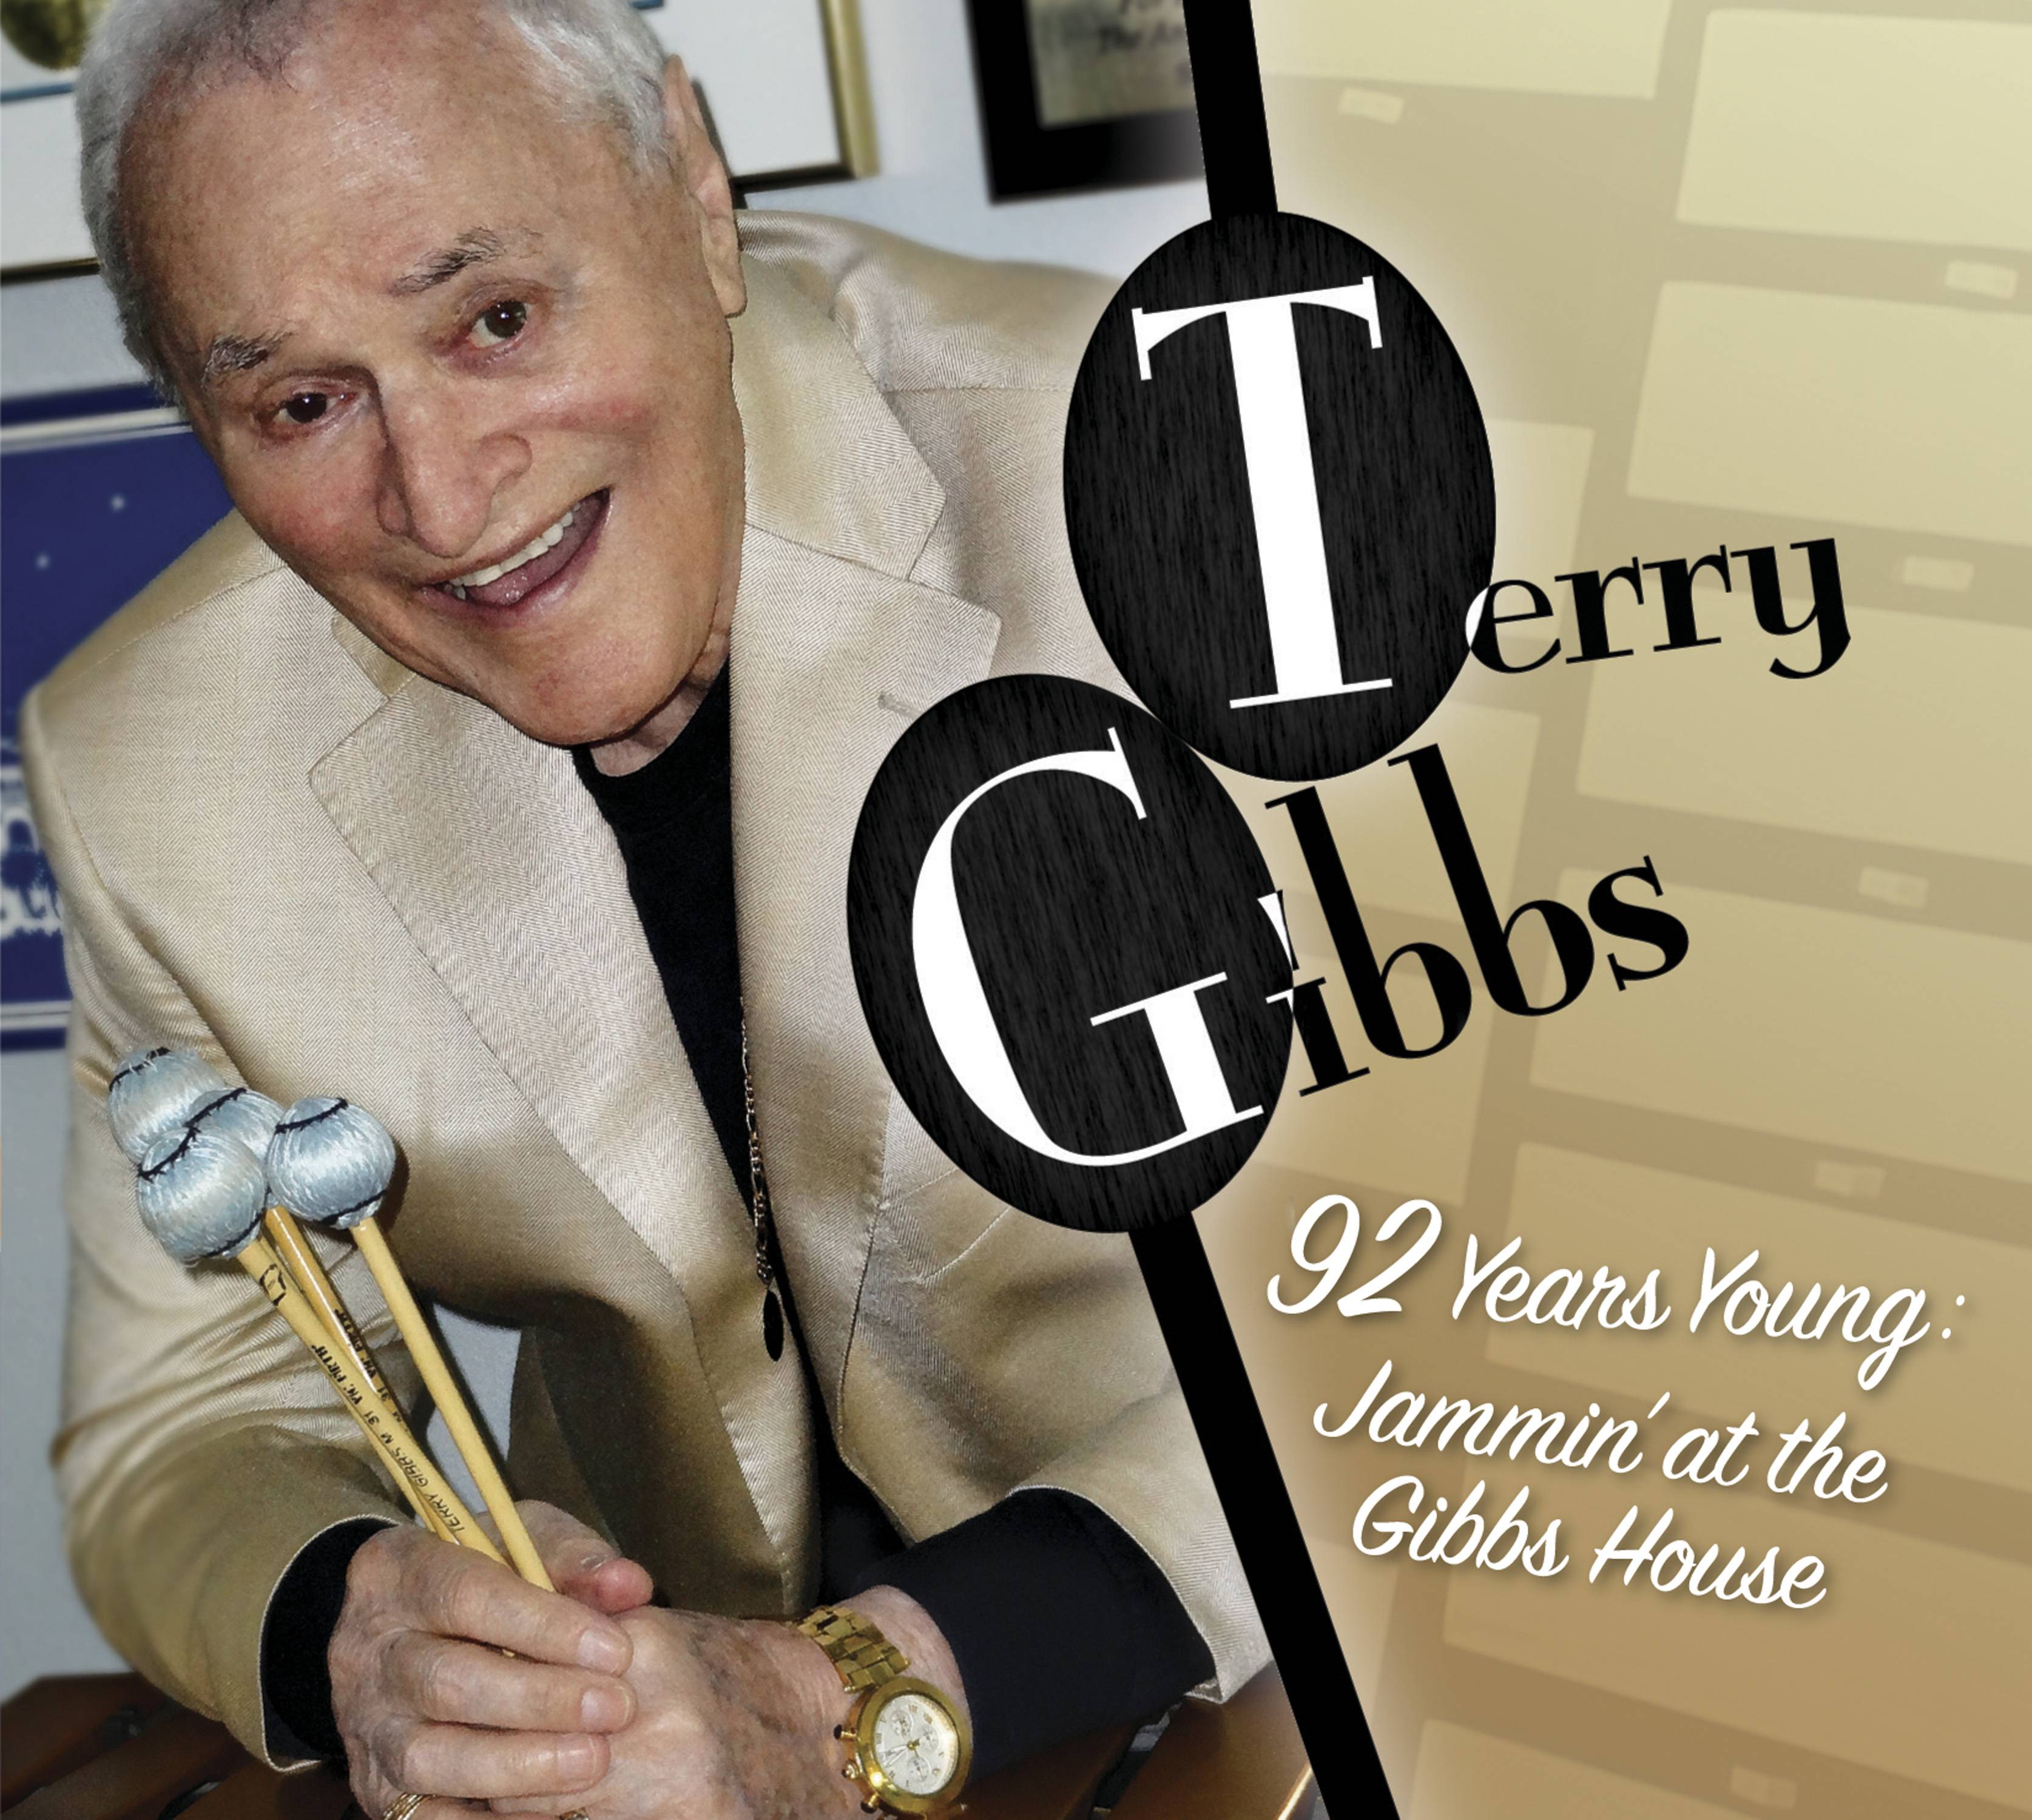 Terry Gibbs - 92 Years Young (2017) [HDTracks FLAC 24bit/44,1kHz]